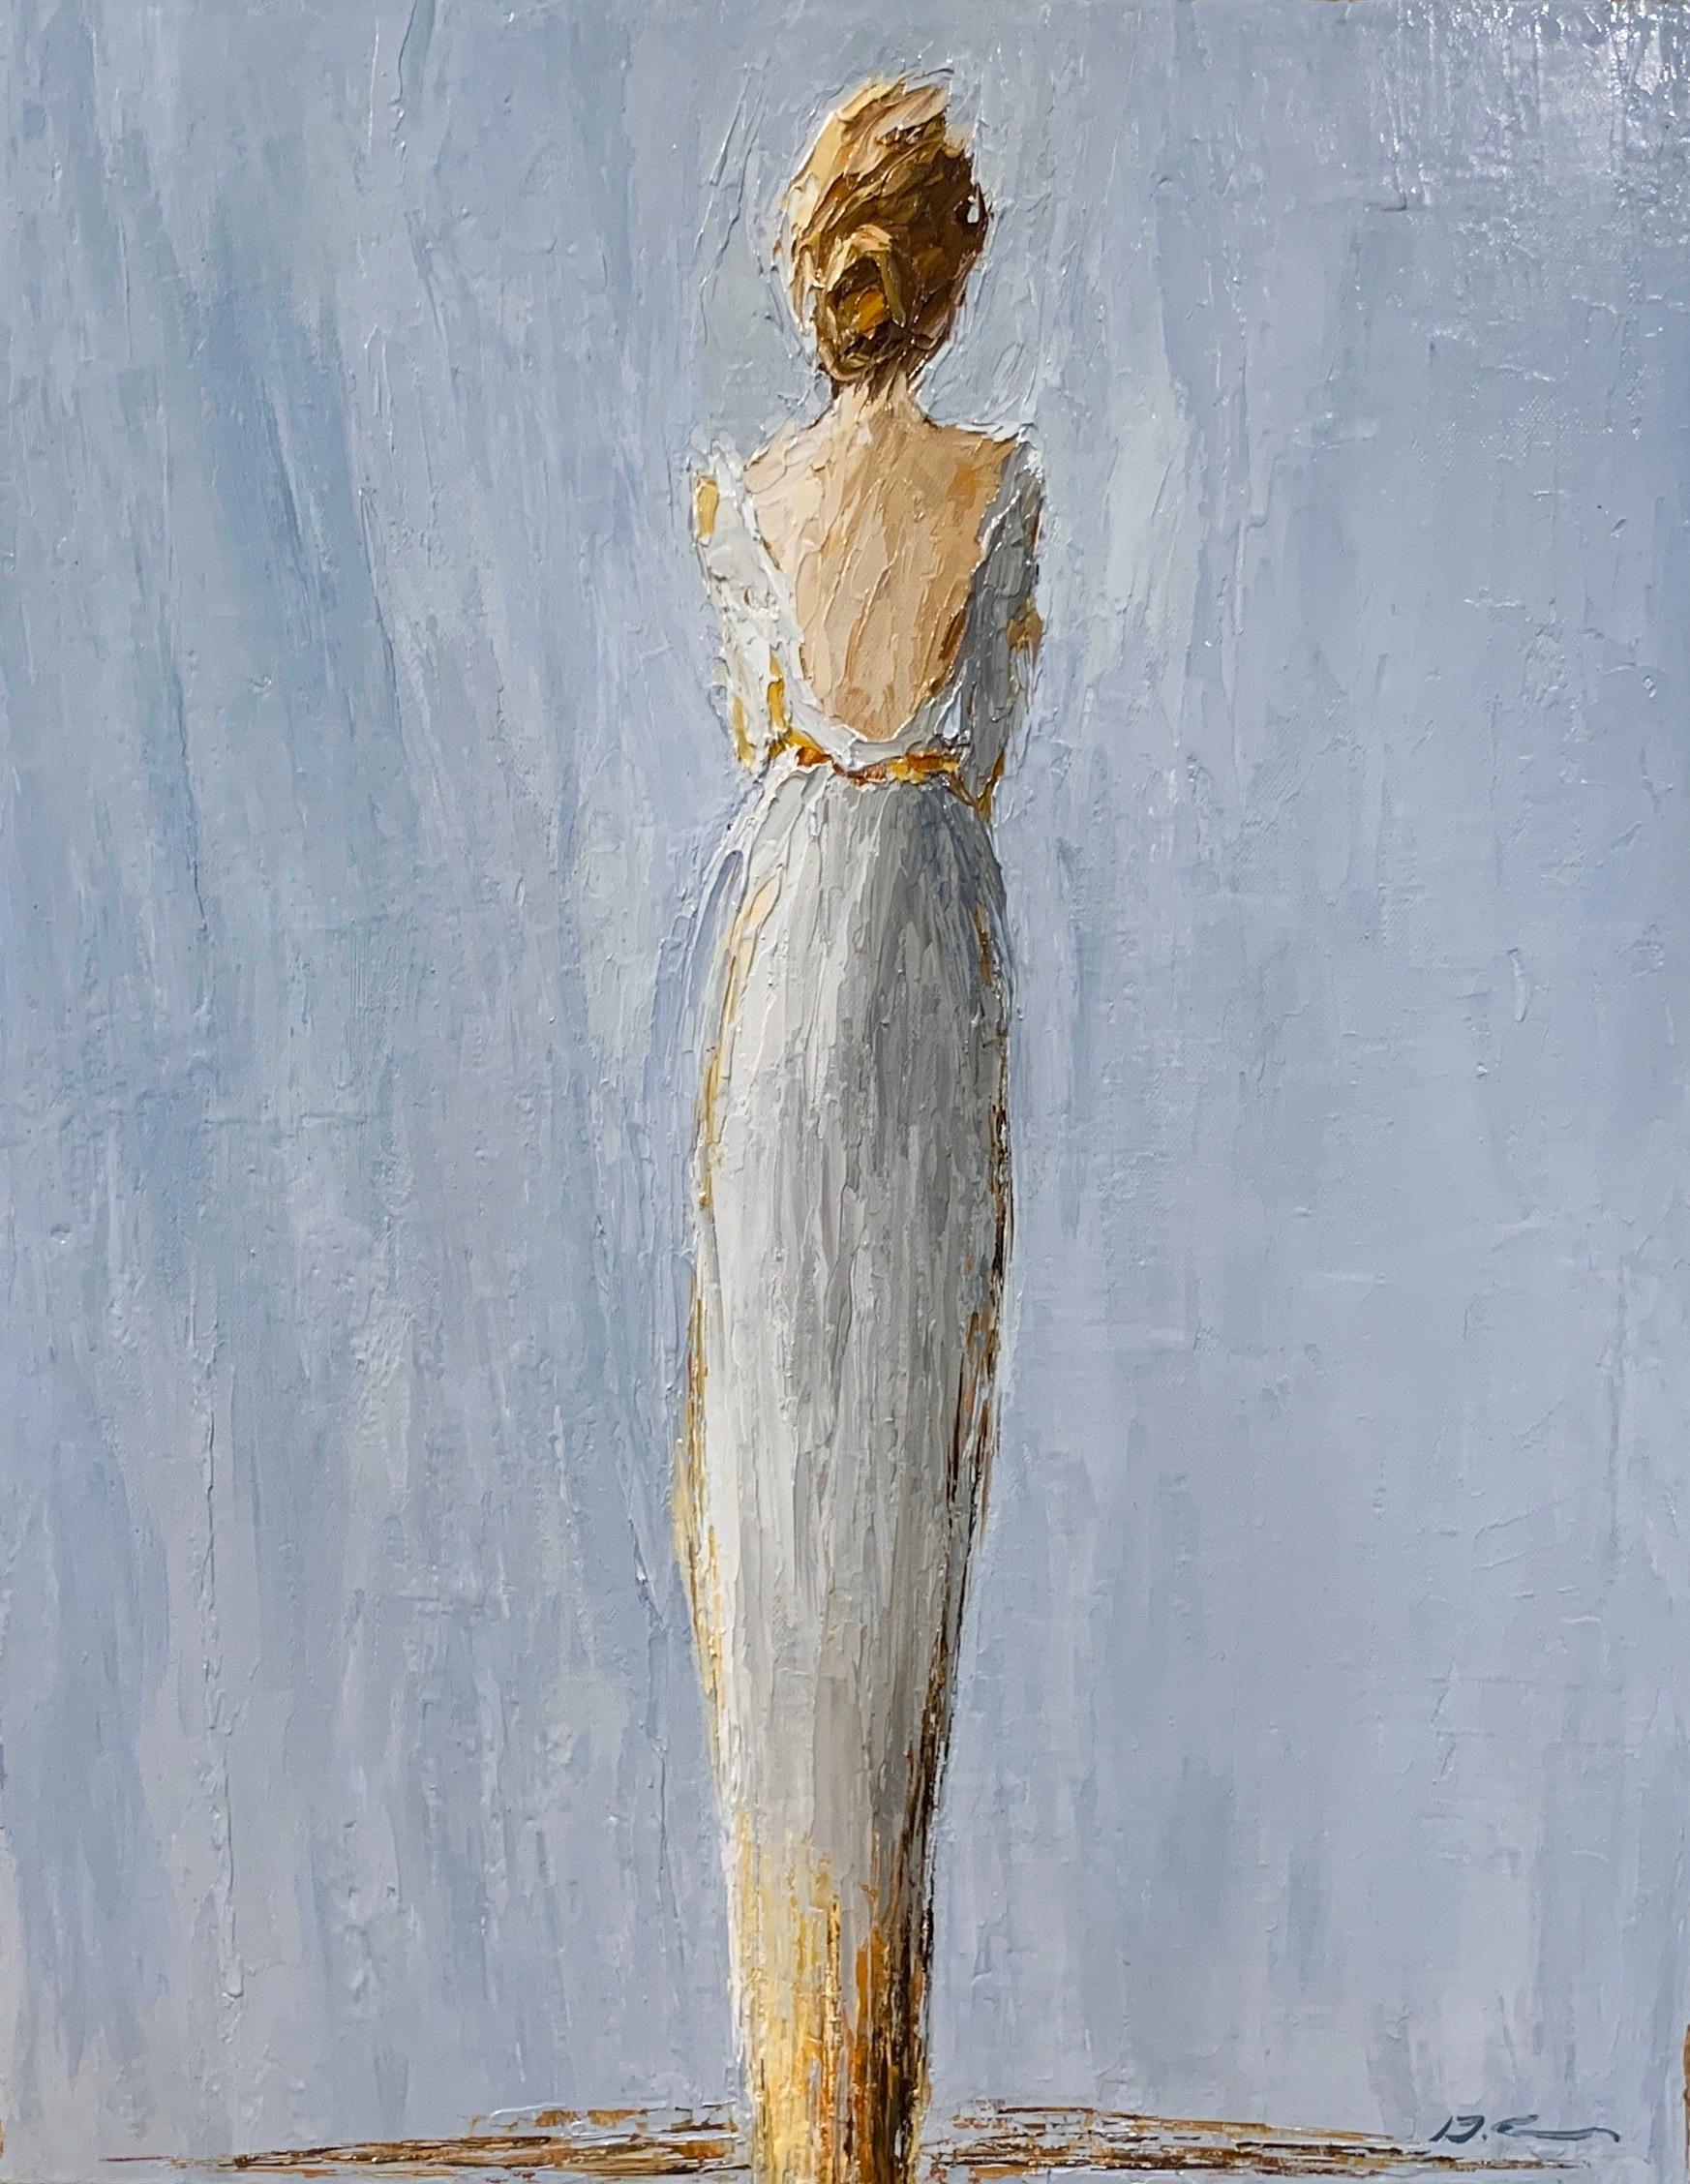 'Annette', is a vertical framed Impressionist figurative oil on canvas painting created by American artist Geri Eubanks in 2020. Featuring a palette made of sky blue, grey and golden tonalities, the painting depicts a blond-haired woman represented